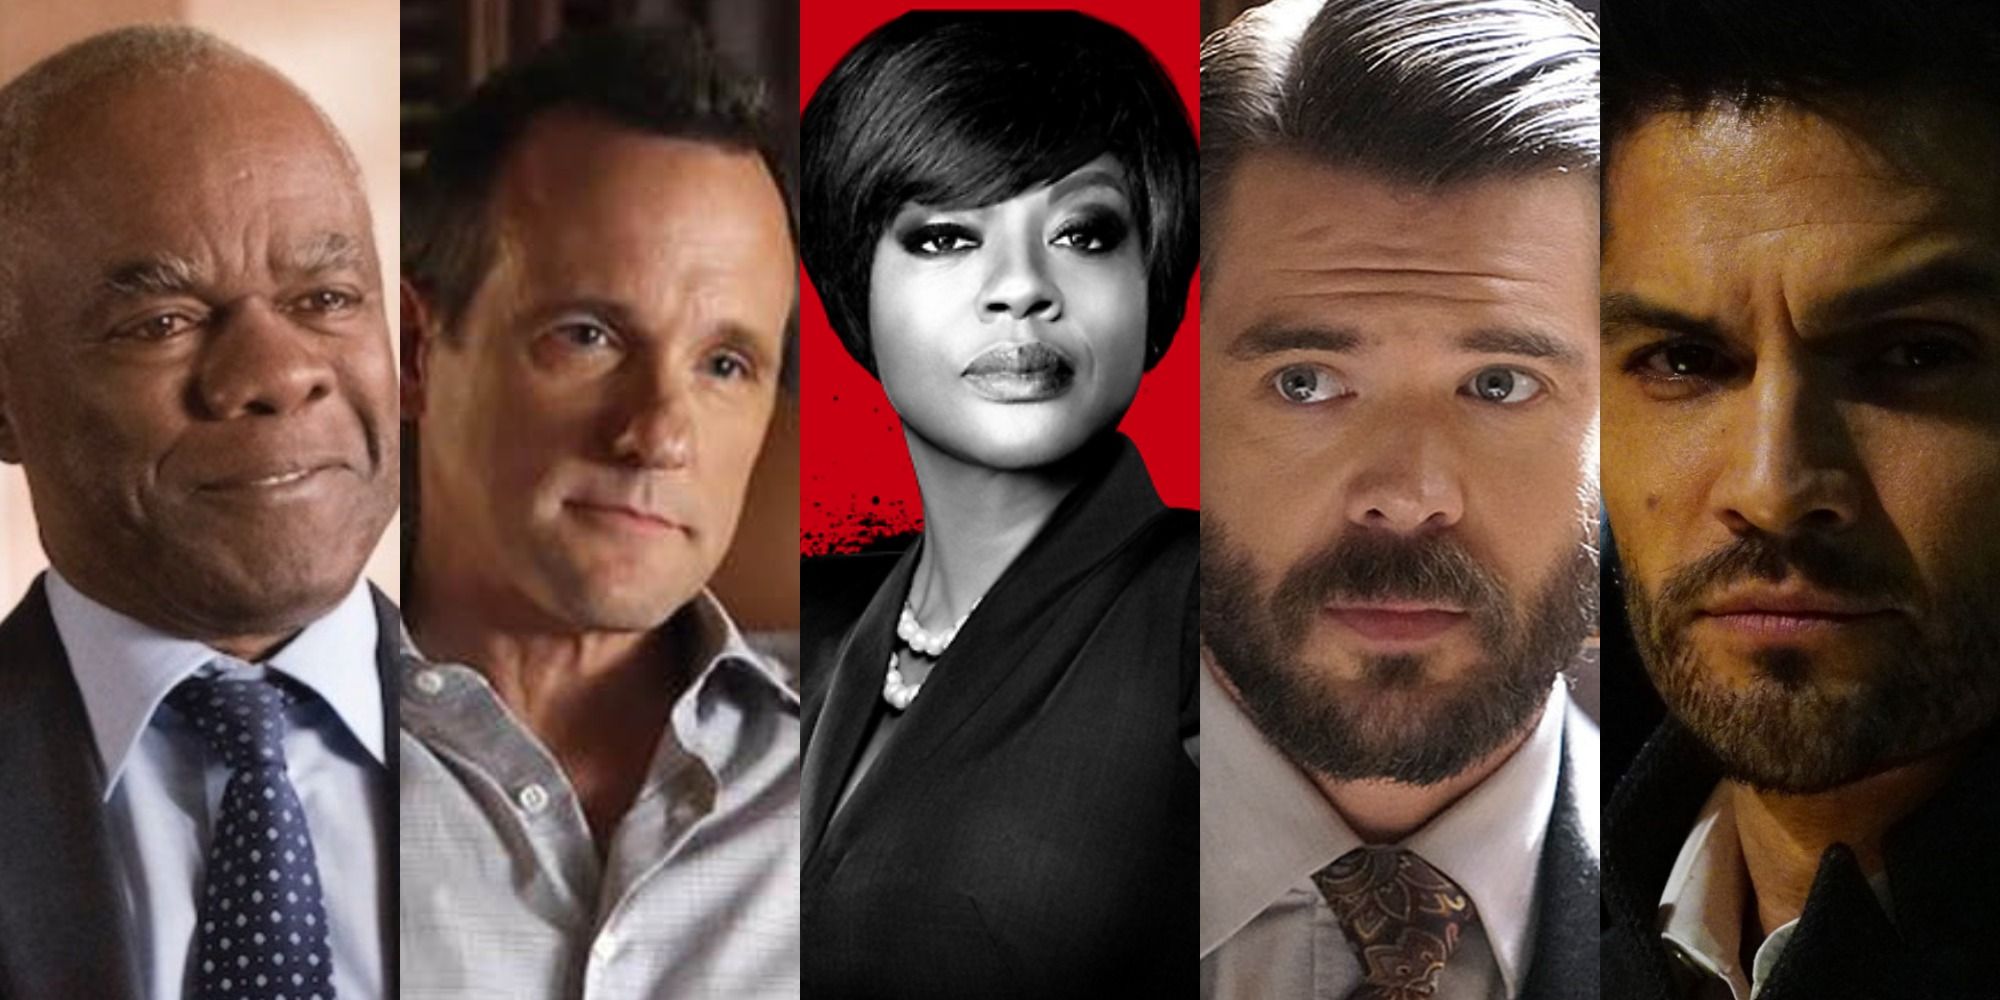 How To Get Away With Murder The 15 Most Brutal Kills Ranked